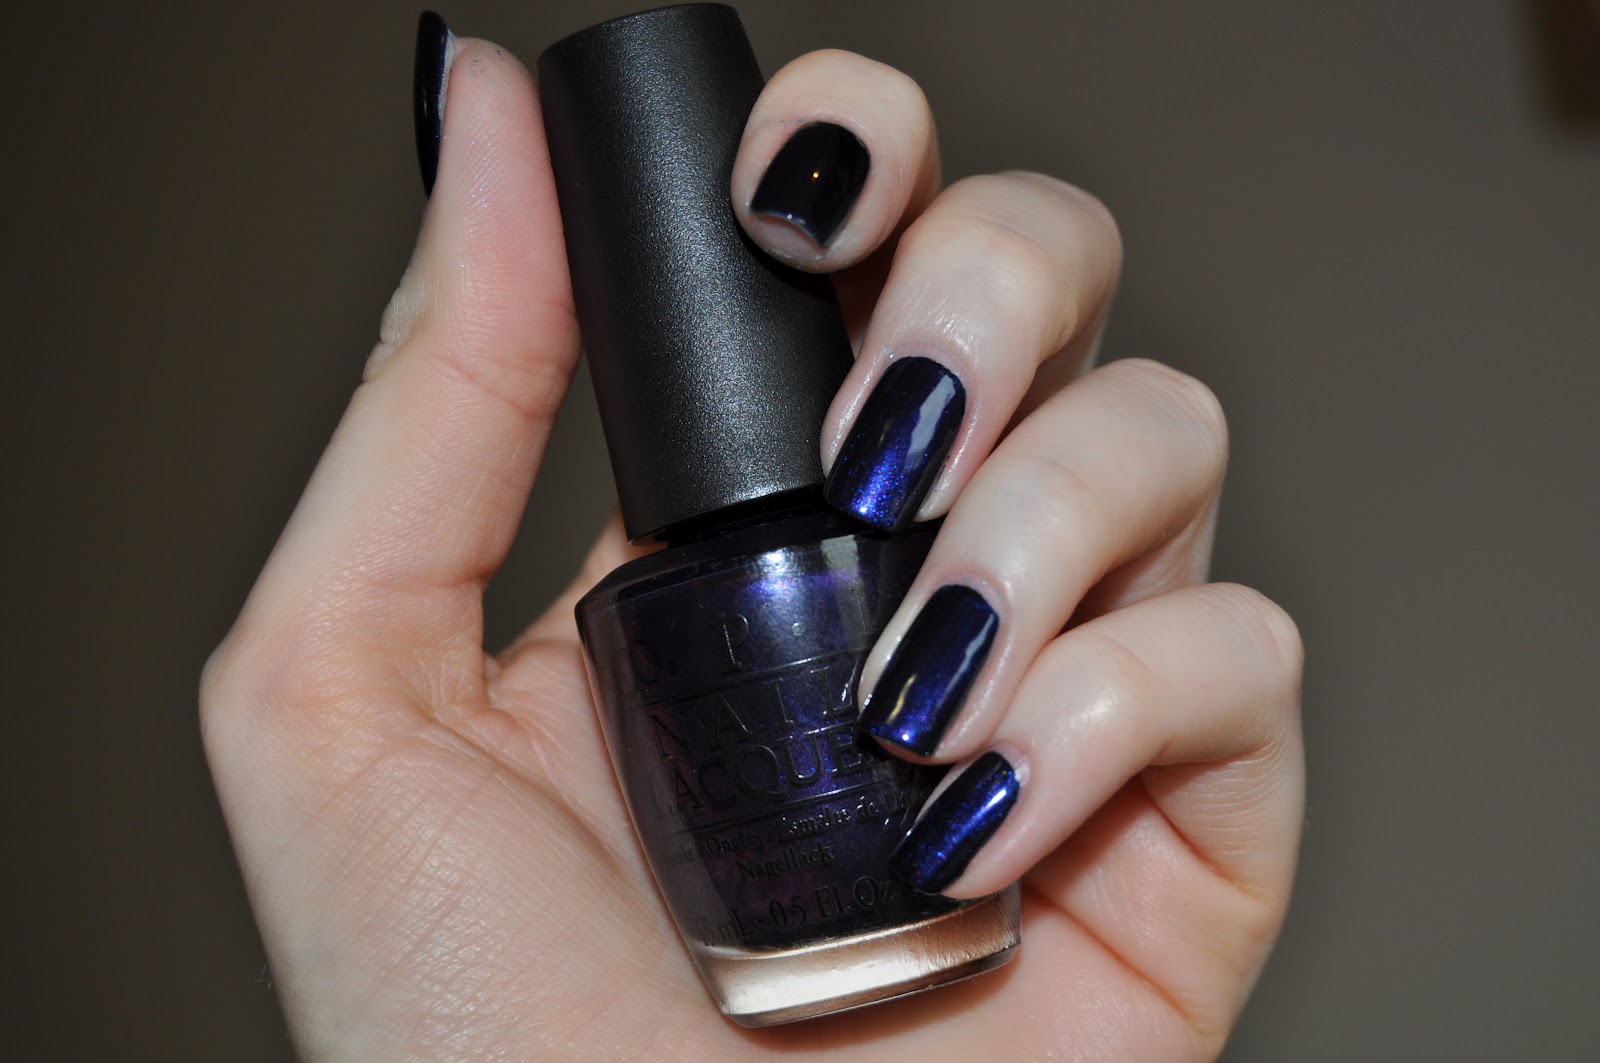 1. OPI Russian Navy - wide 3